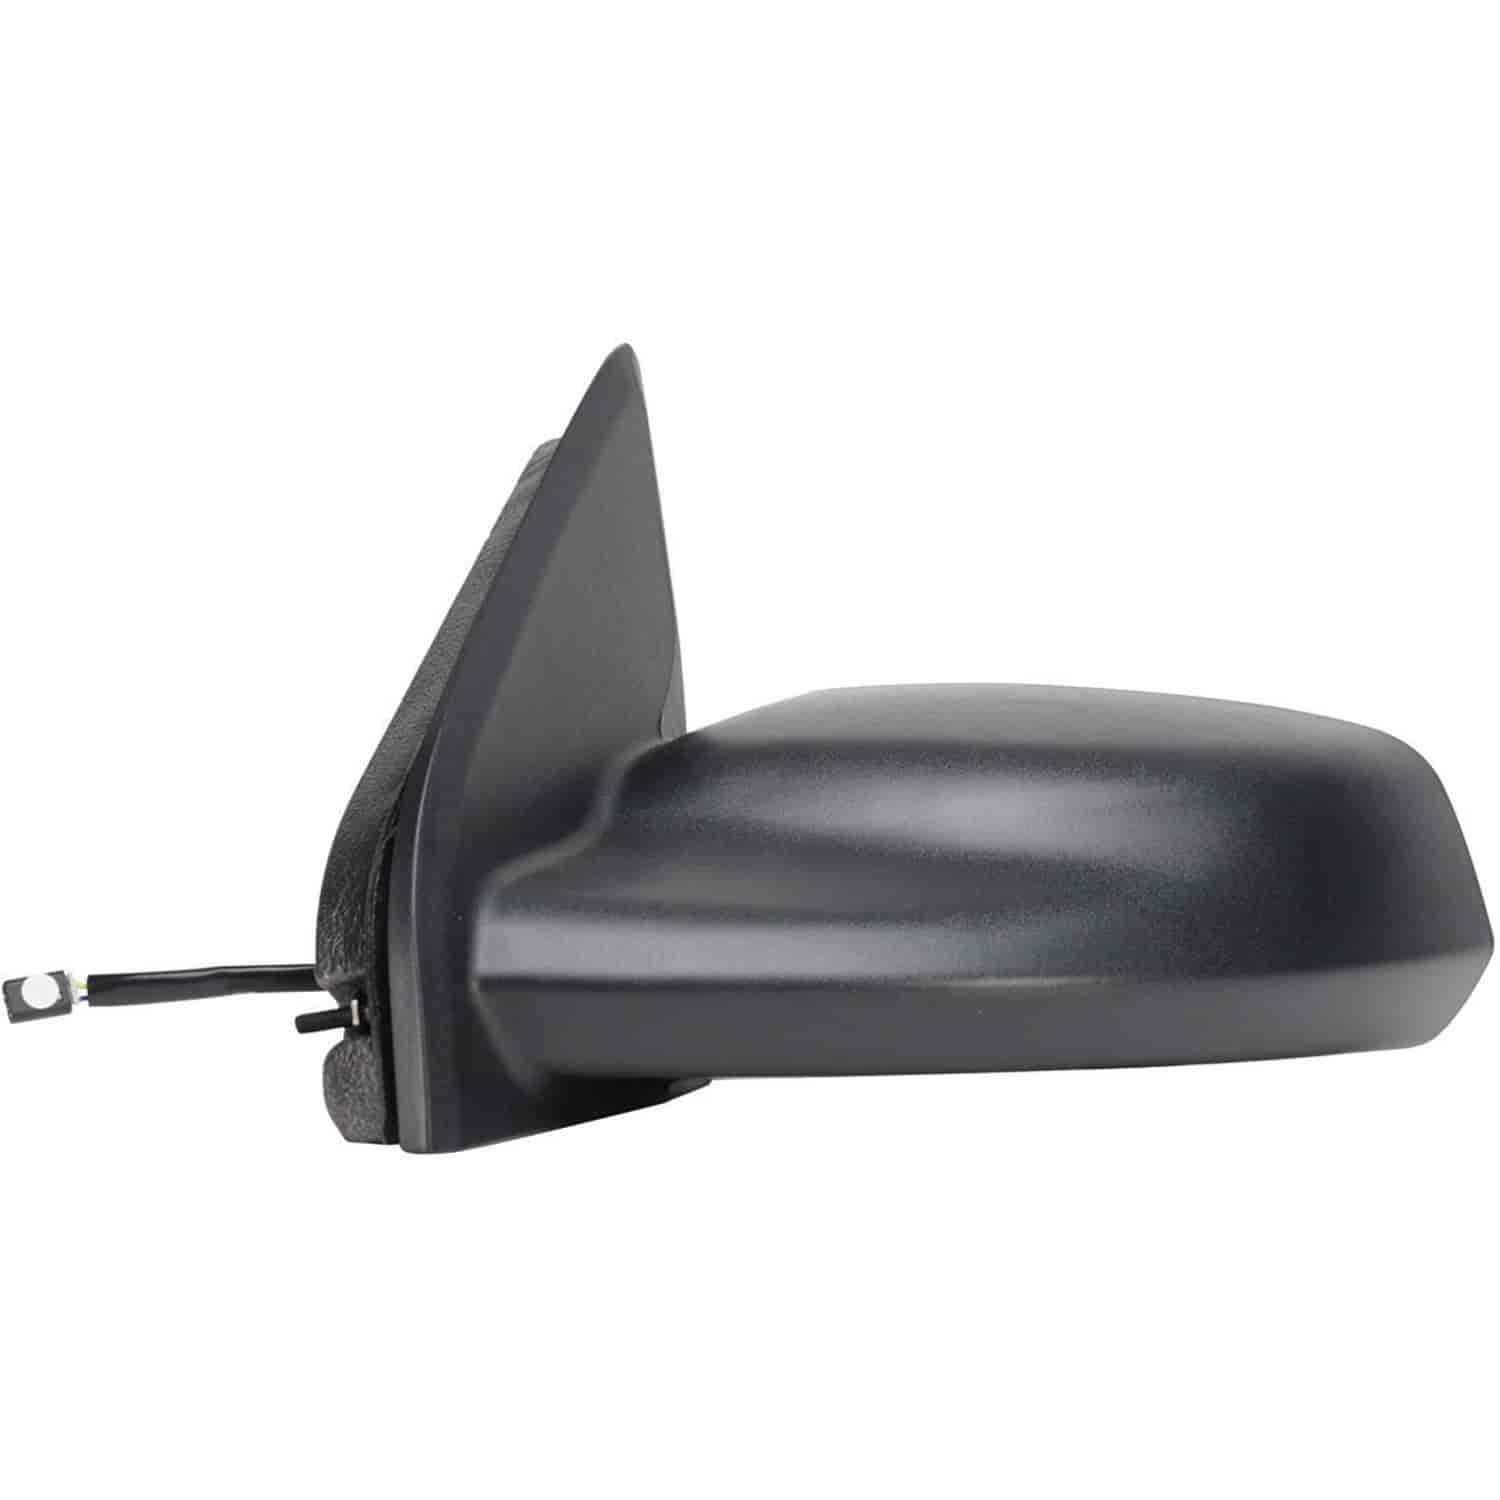 OEM Style Replacement mirror for 03-07 Saturn Ion 3 Sedan driver side mirror tested to fit and funct